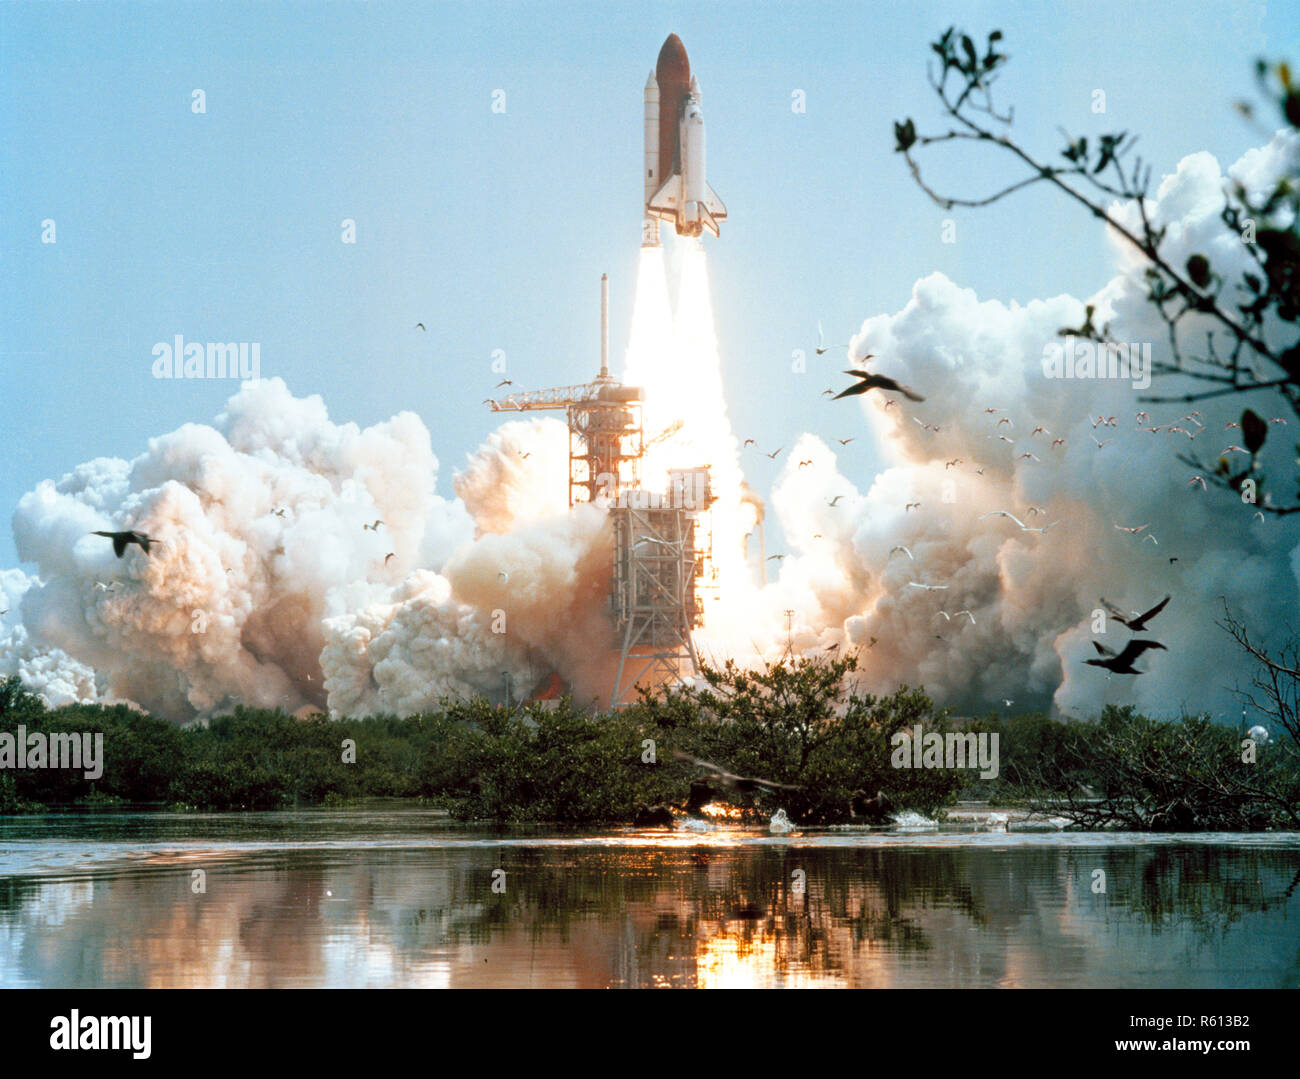 Space Shuttle Columbia STS-4 Mission.jpg-R613 B2 Stockfoto